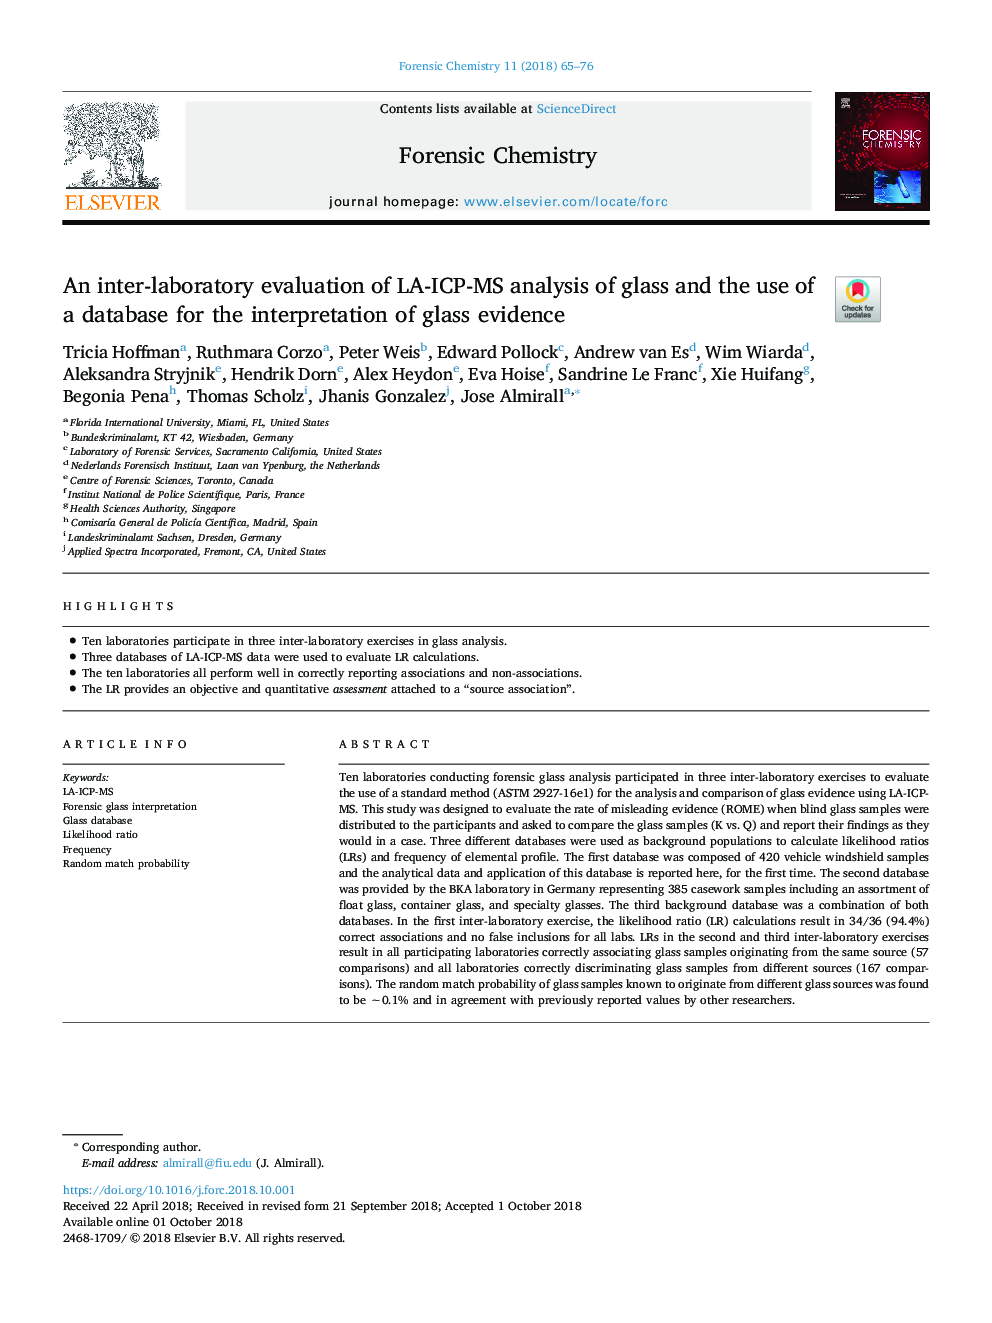 An inter-laboratory evaluation of LA-ICP-MS analysis of glass and the use of a database for the interpretation of glass evidence